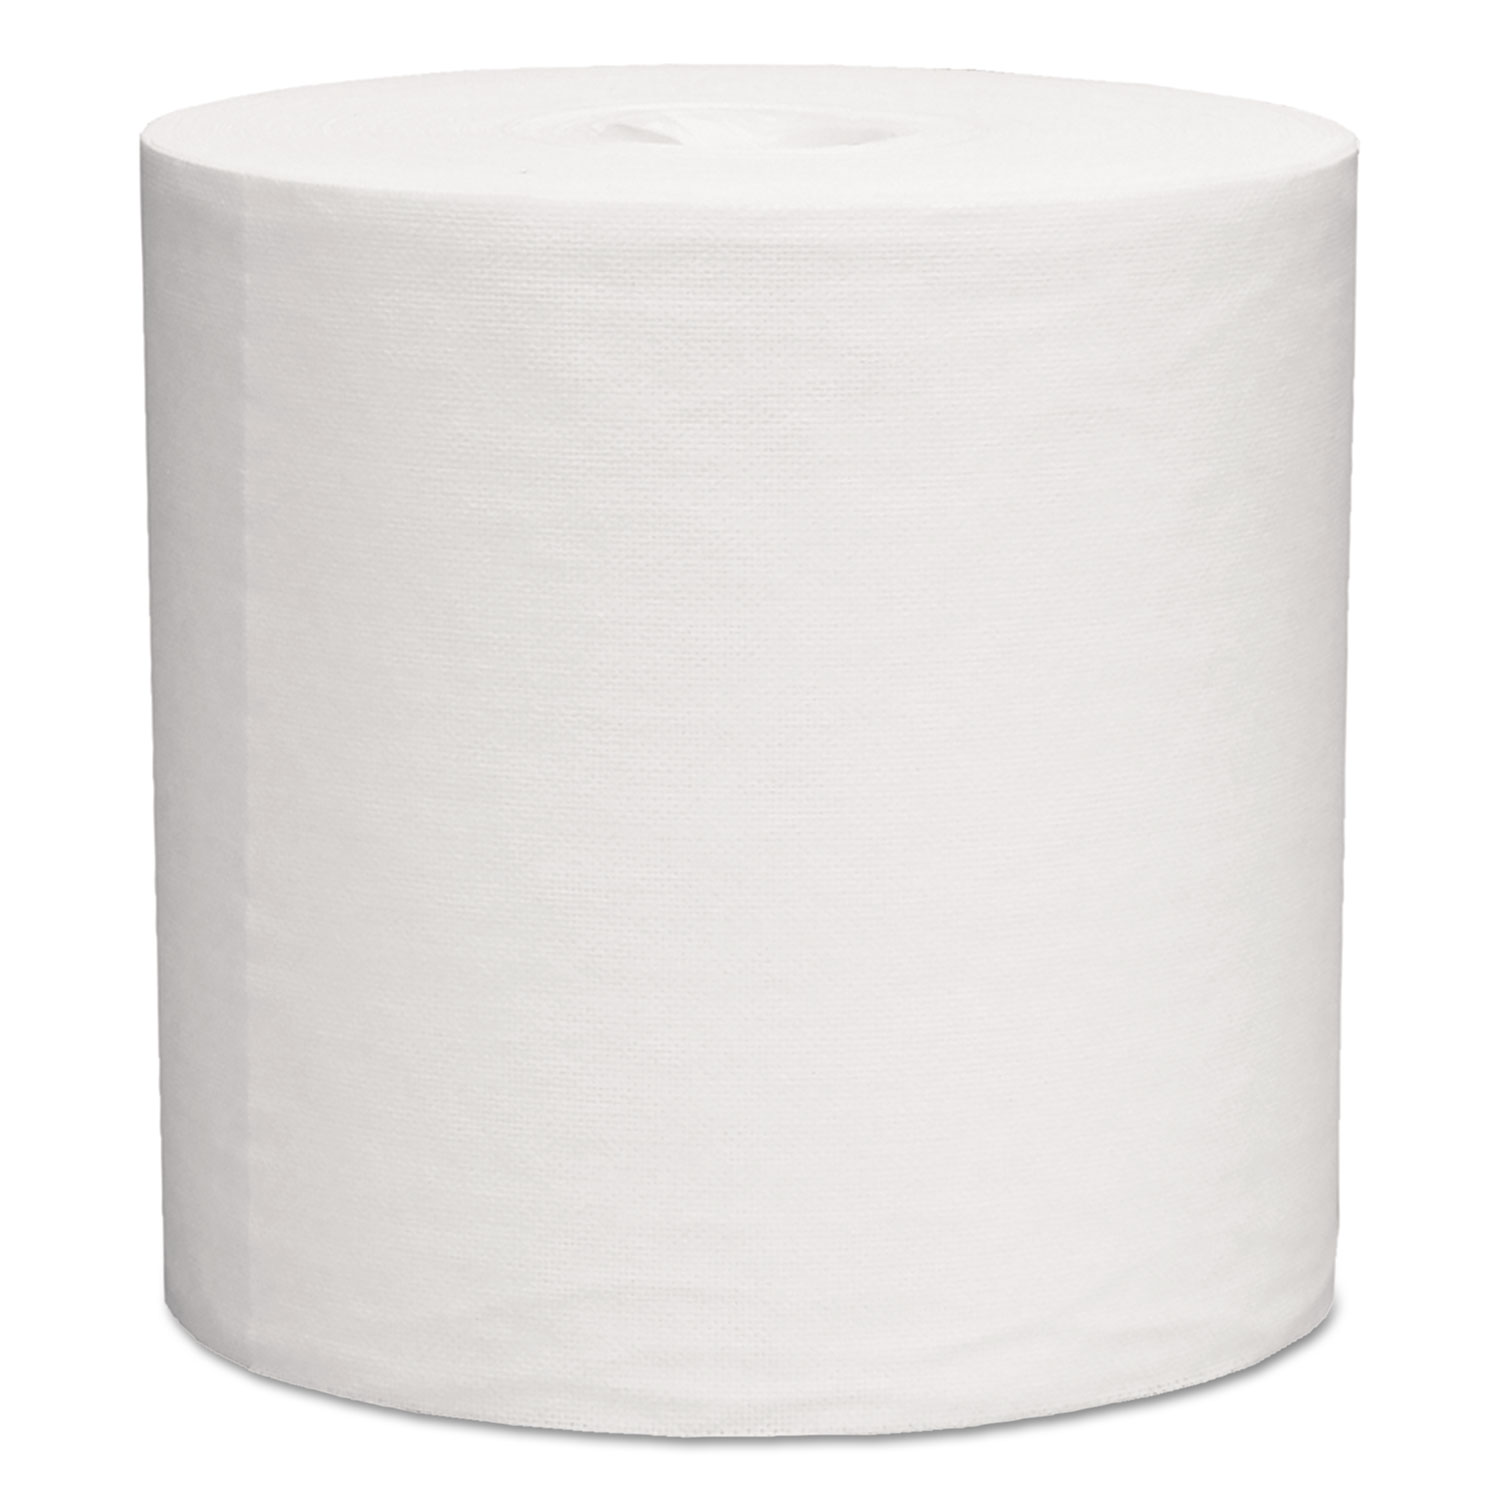 L40 Towels, Center-Pull, 10 x 13 1/5, White, 200/Roll, 2/Carton